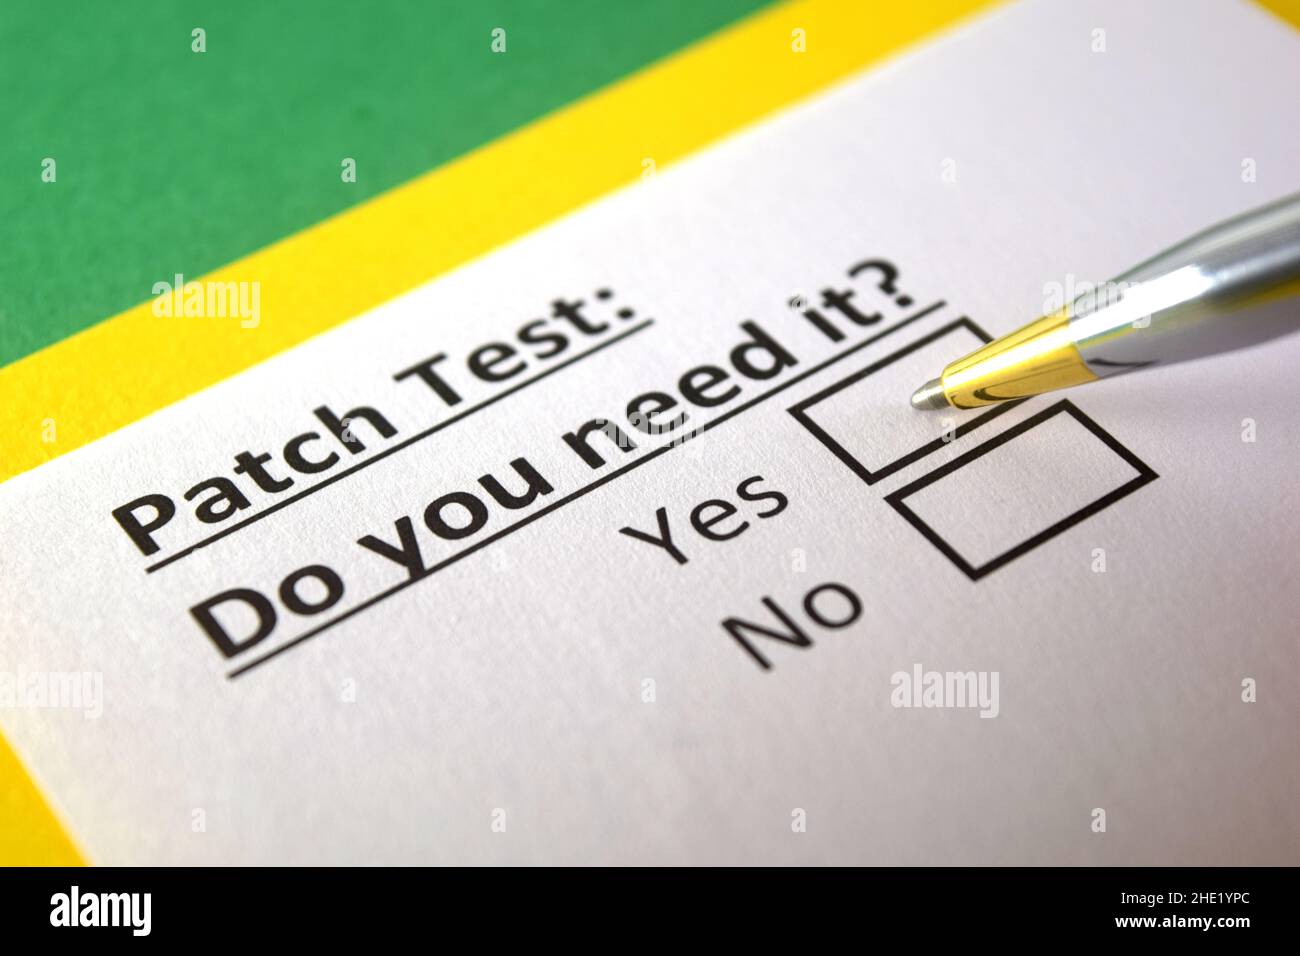 One person is answering question about patch test. Stock Photo